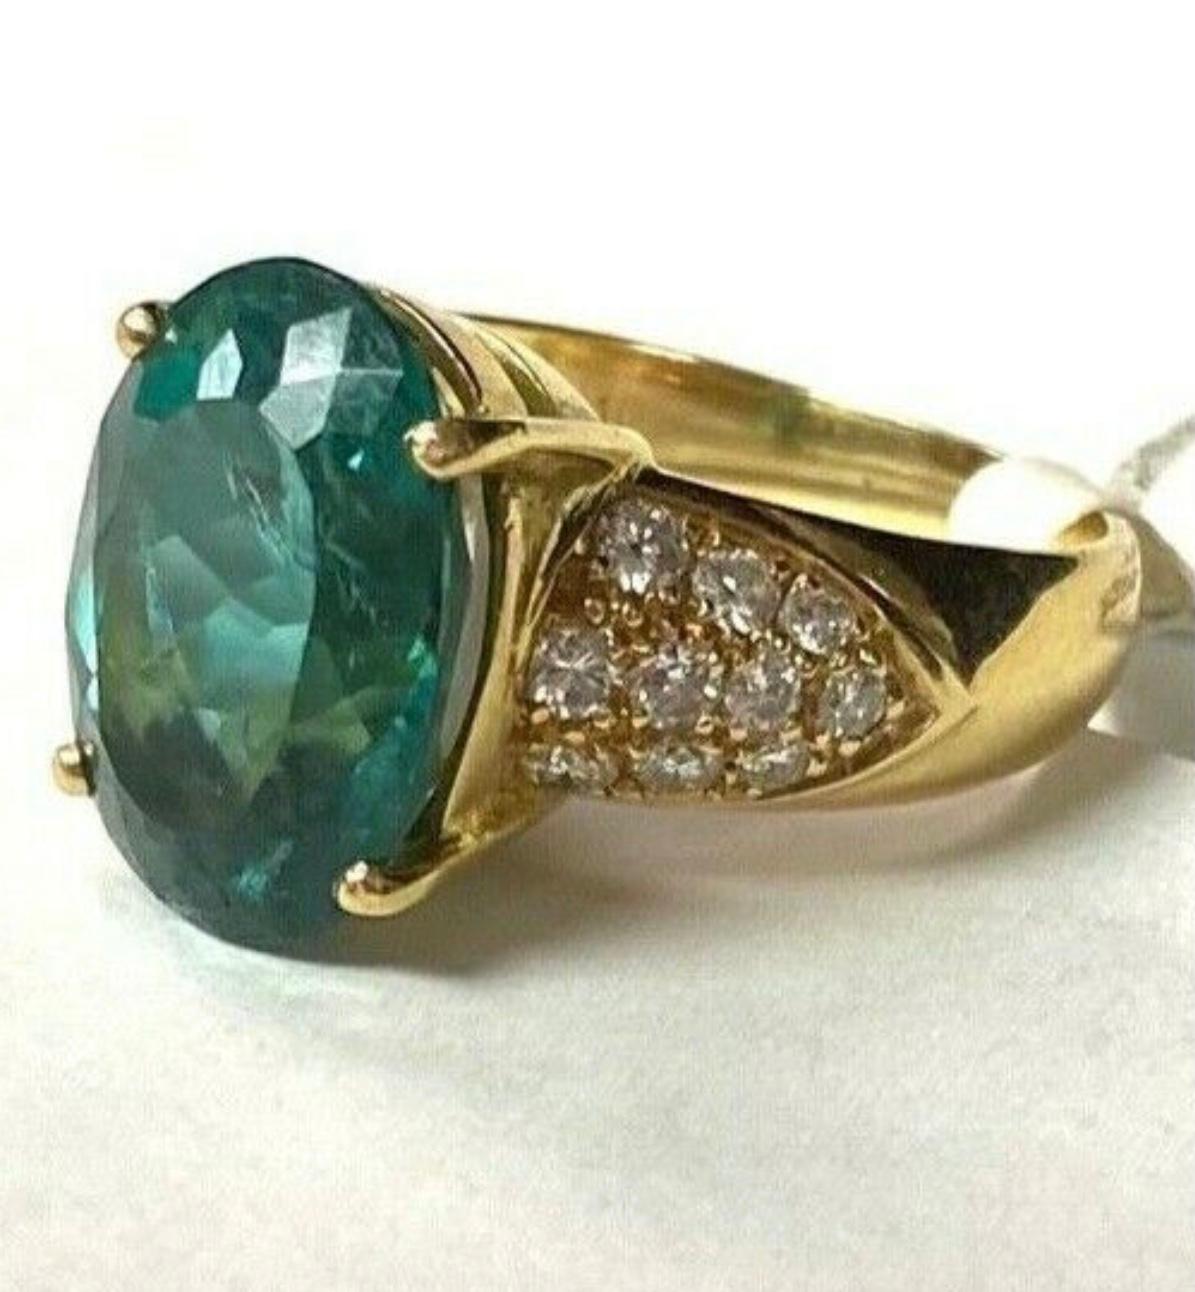 18k yellow Rare Green Topaz ring. The dimensions of the Topaz are approximately 14.95 mm x 9.5 mm each. Approximately 5 carats. Marked 18k. Approximate ring size 6.5.